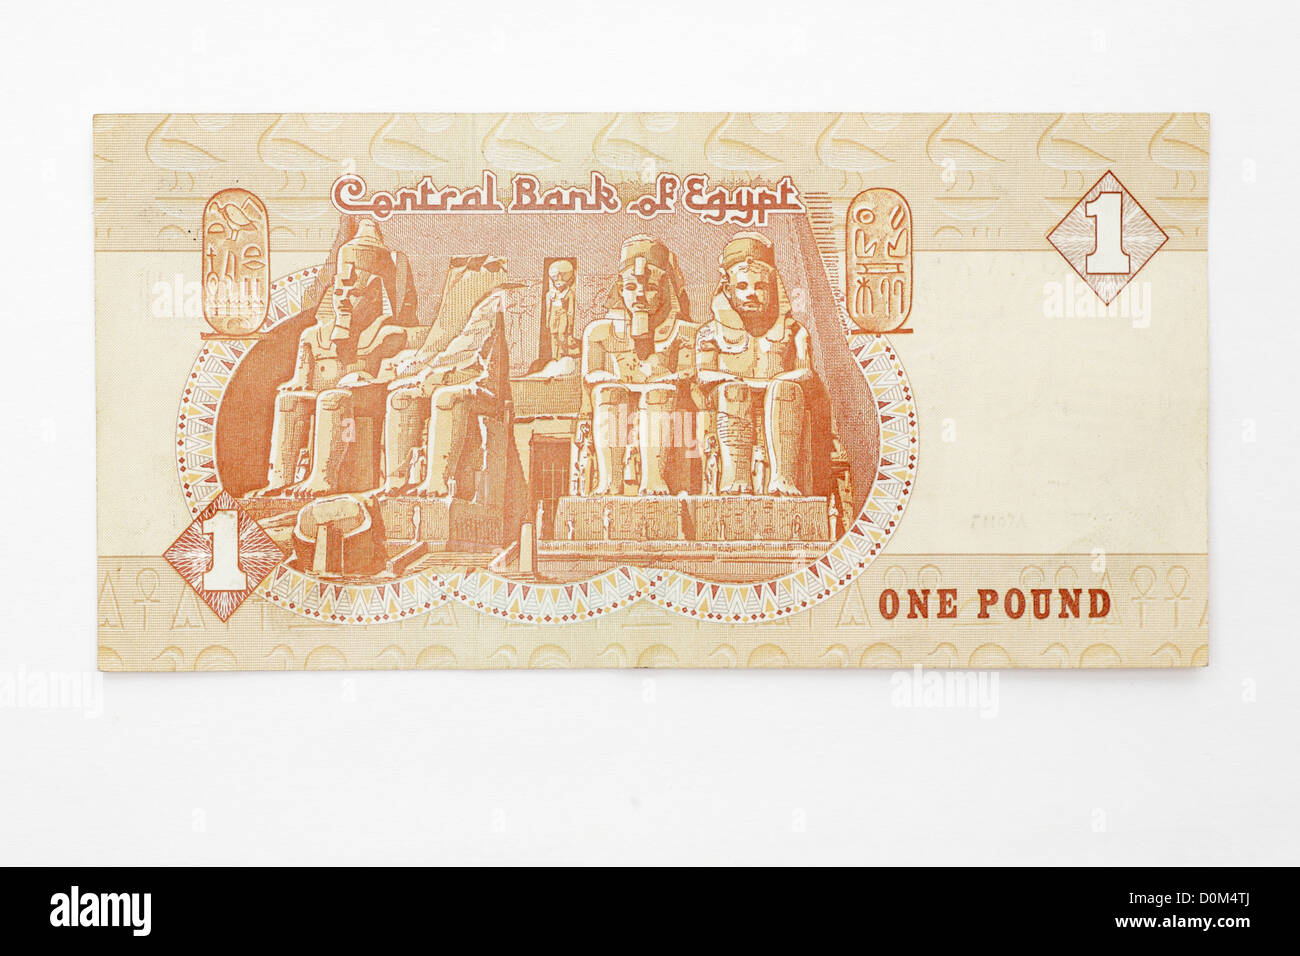 Central Bank of Egypt One Pound Note Egyptian currency money Stock Photo